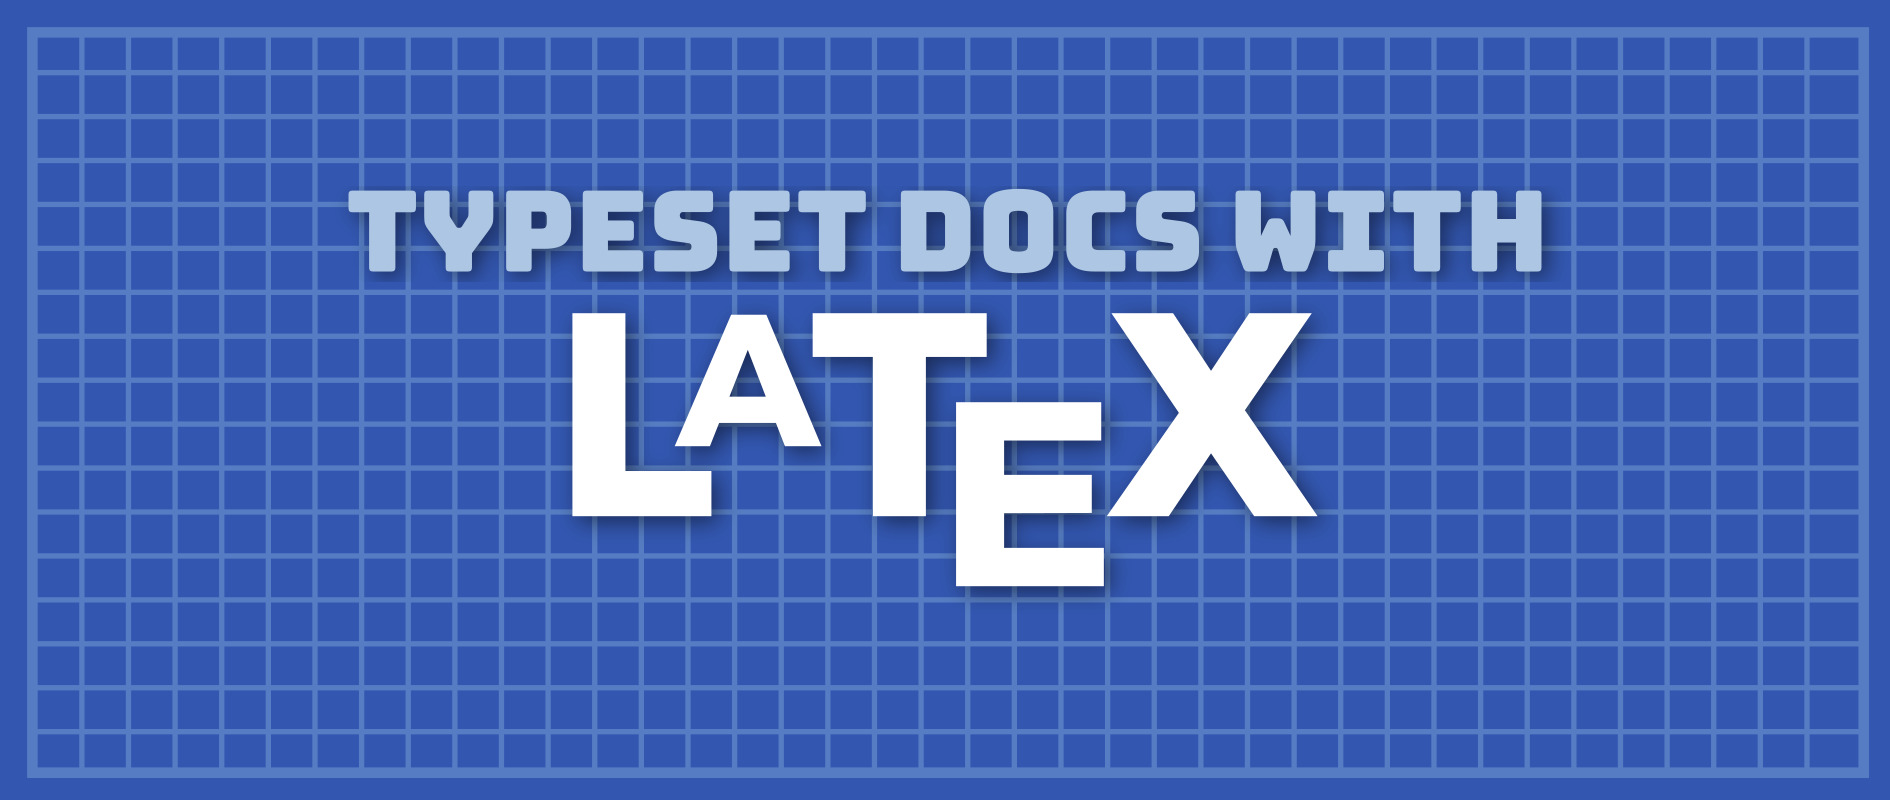 a preparation system document Latex